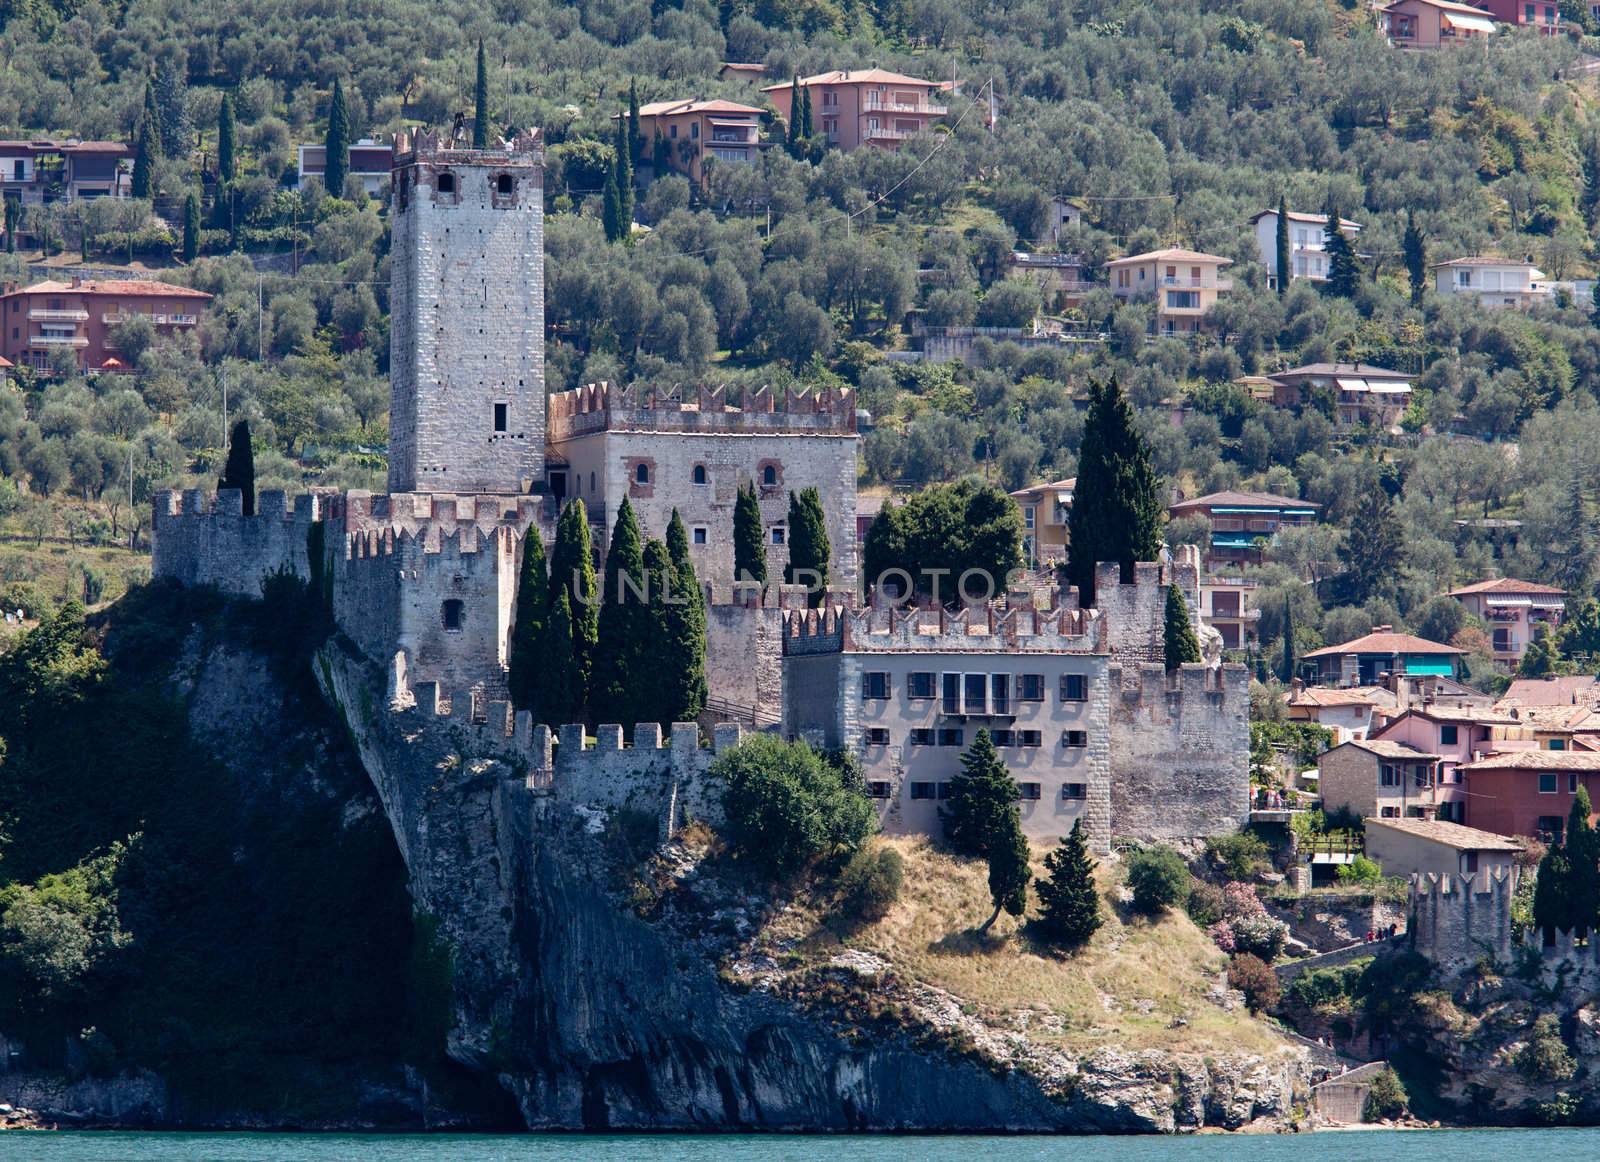 The coast of Malcesine on Lake Garda with the castle framing the town